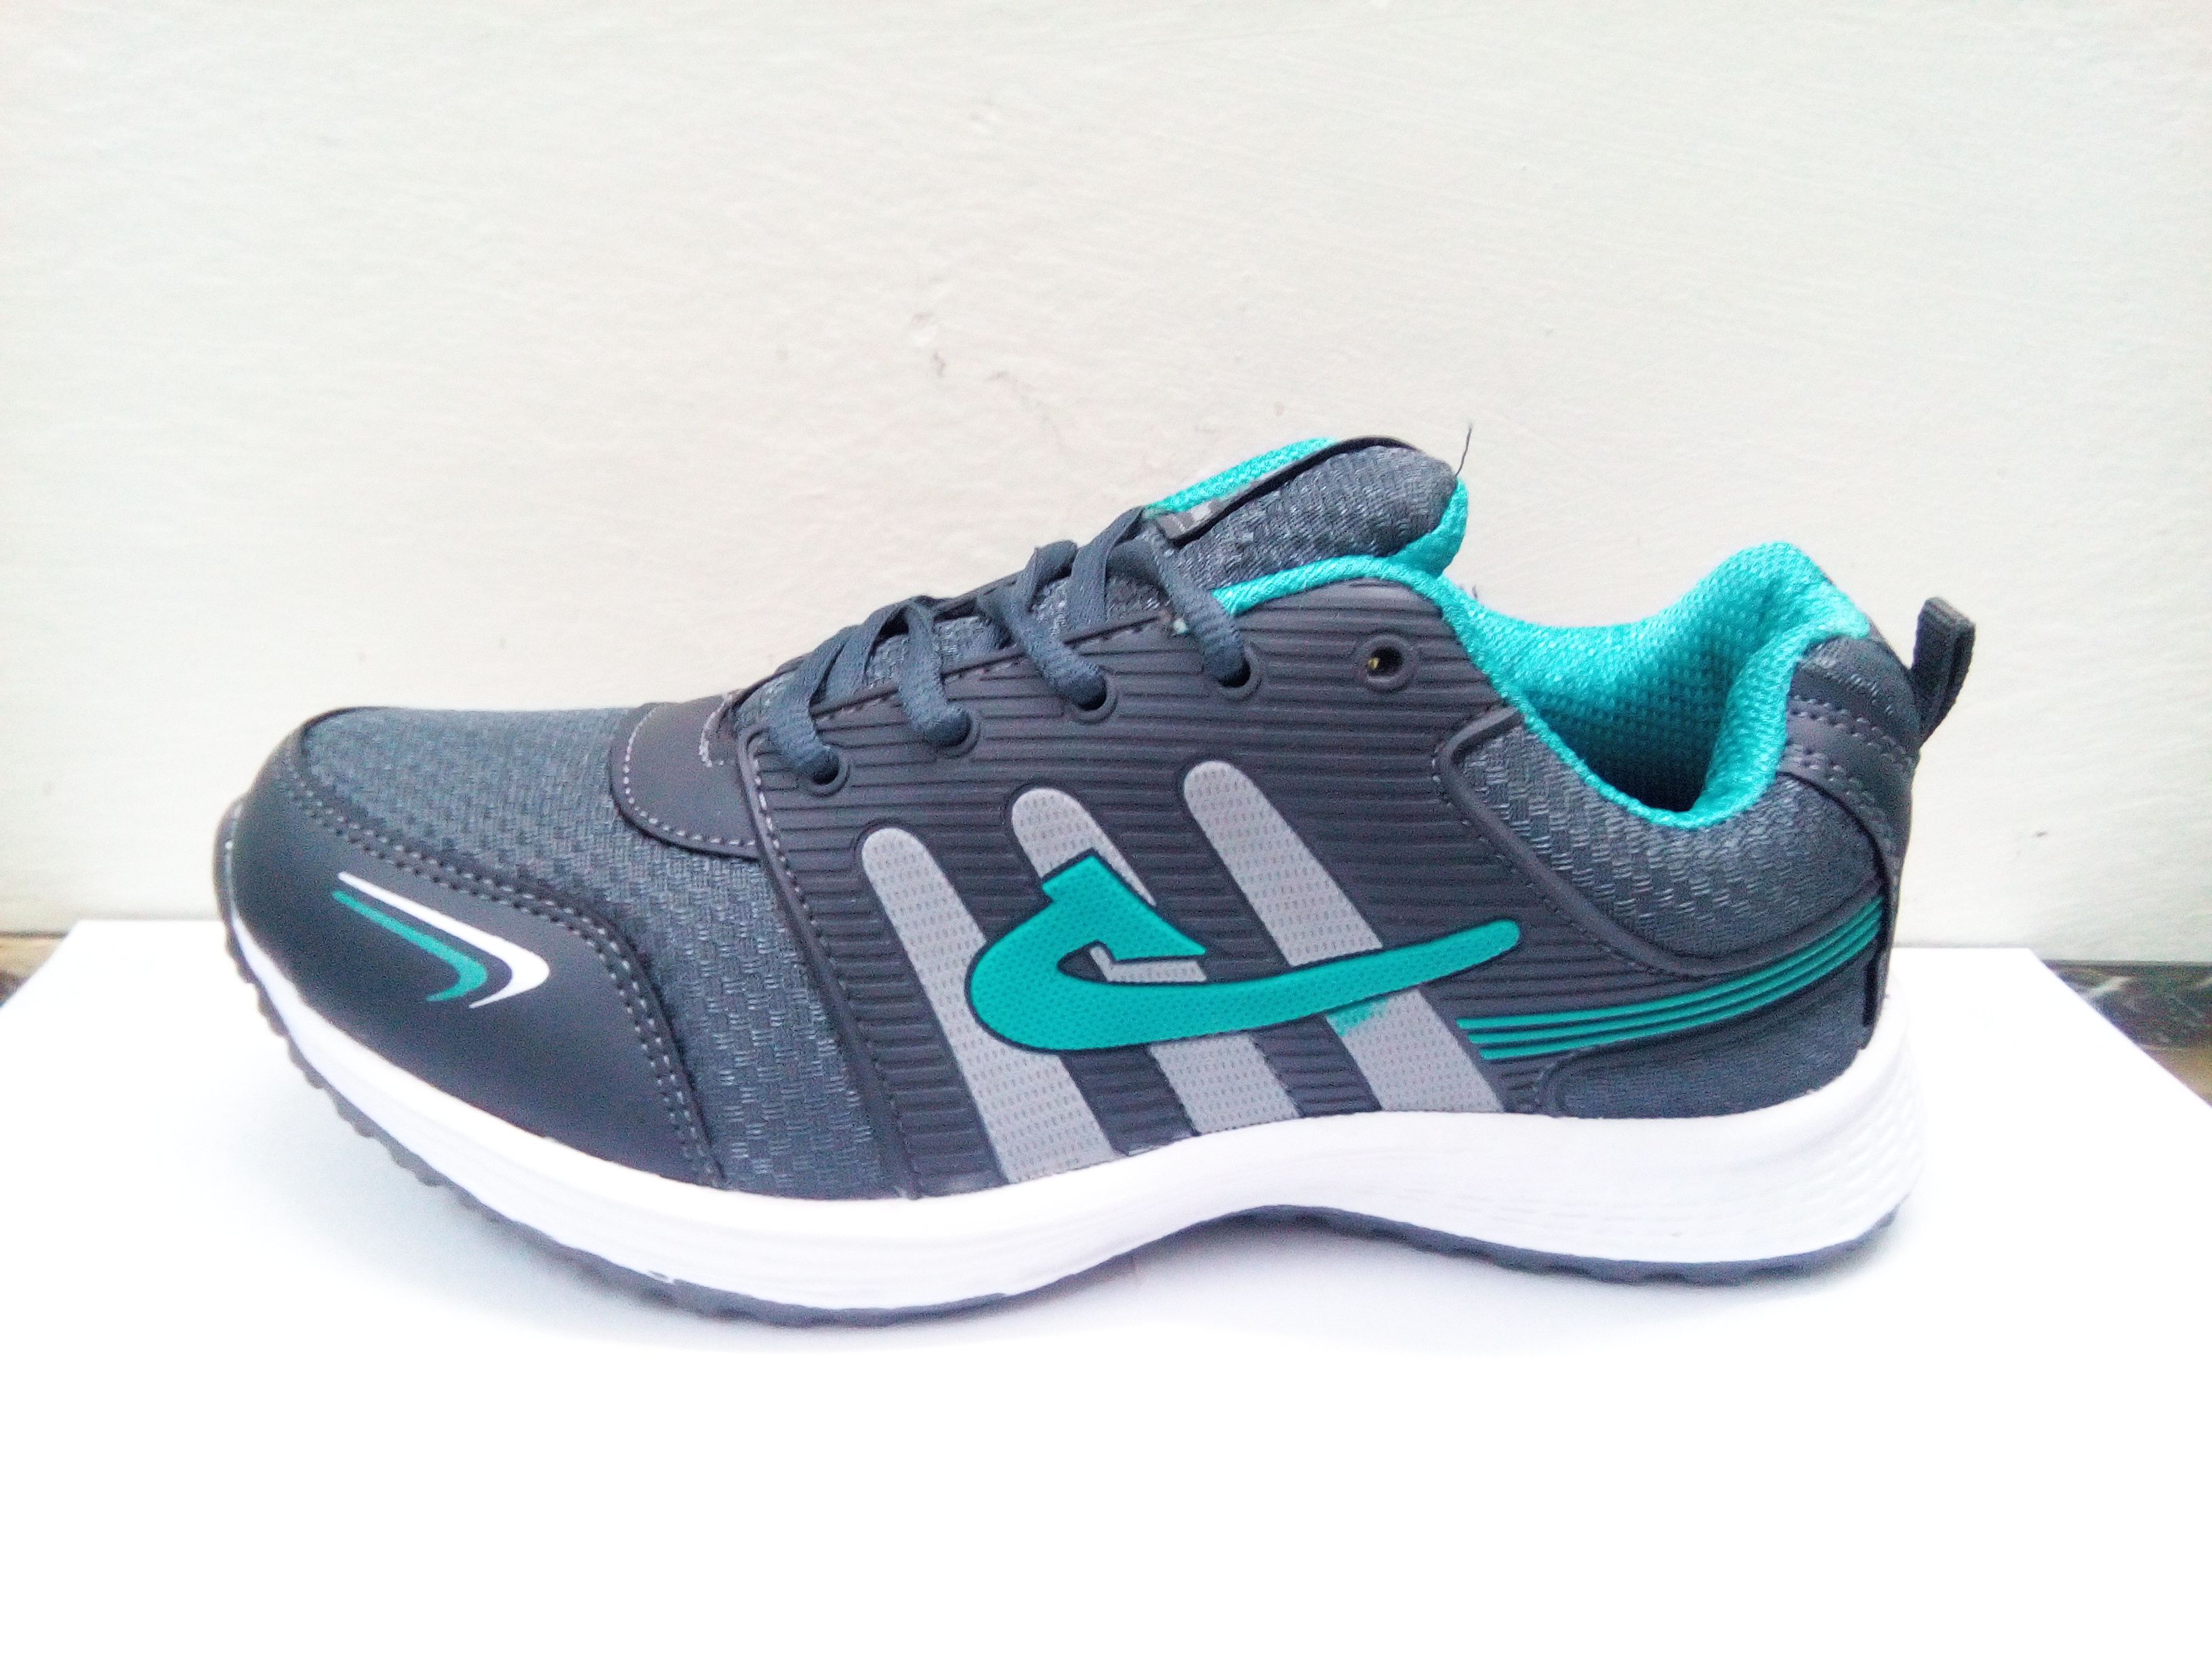 sport shoes offer in india